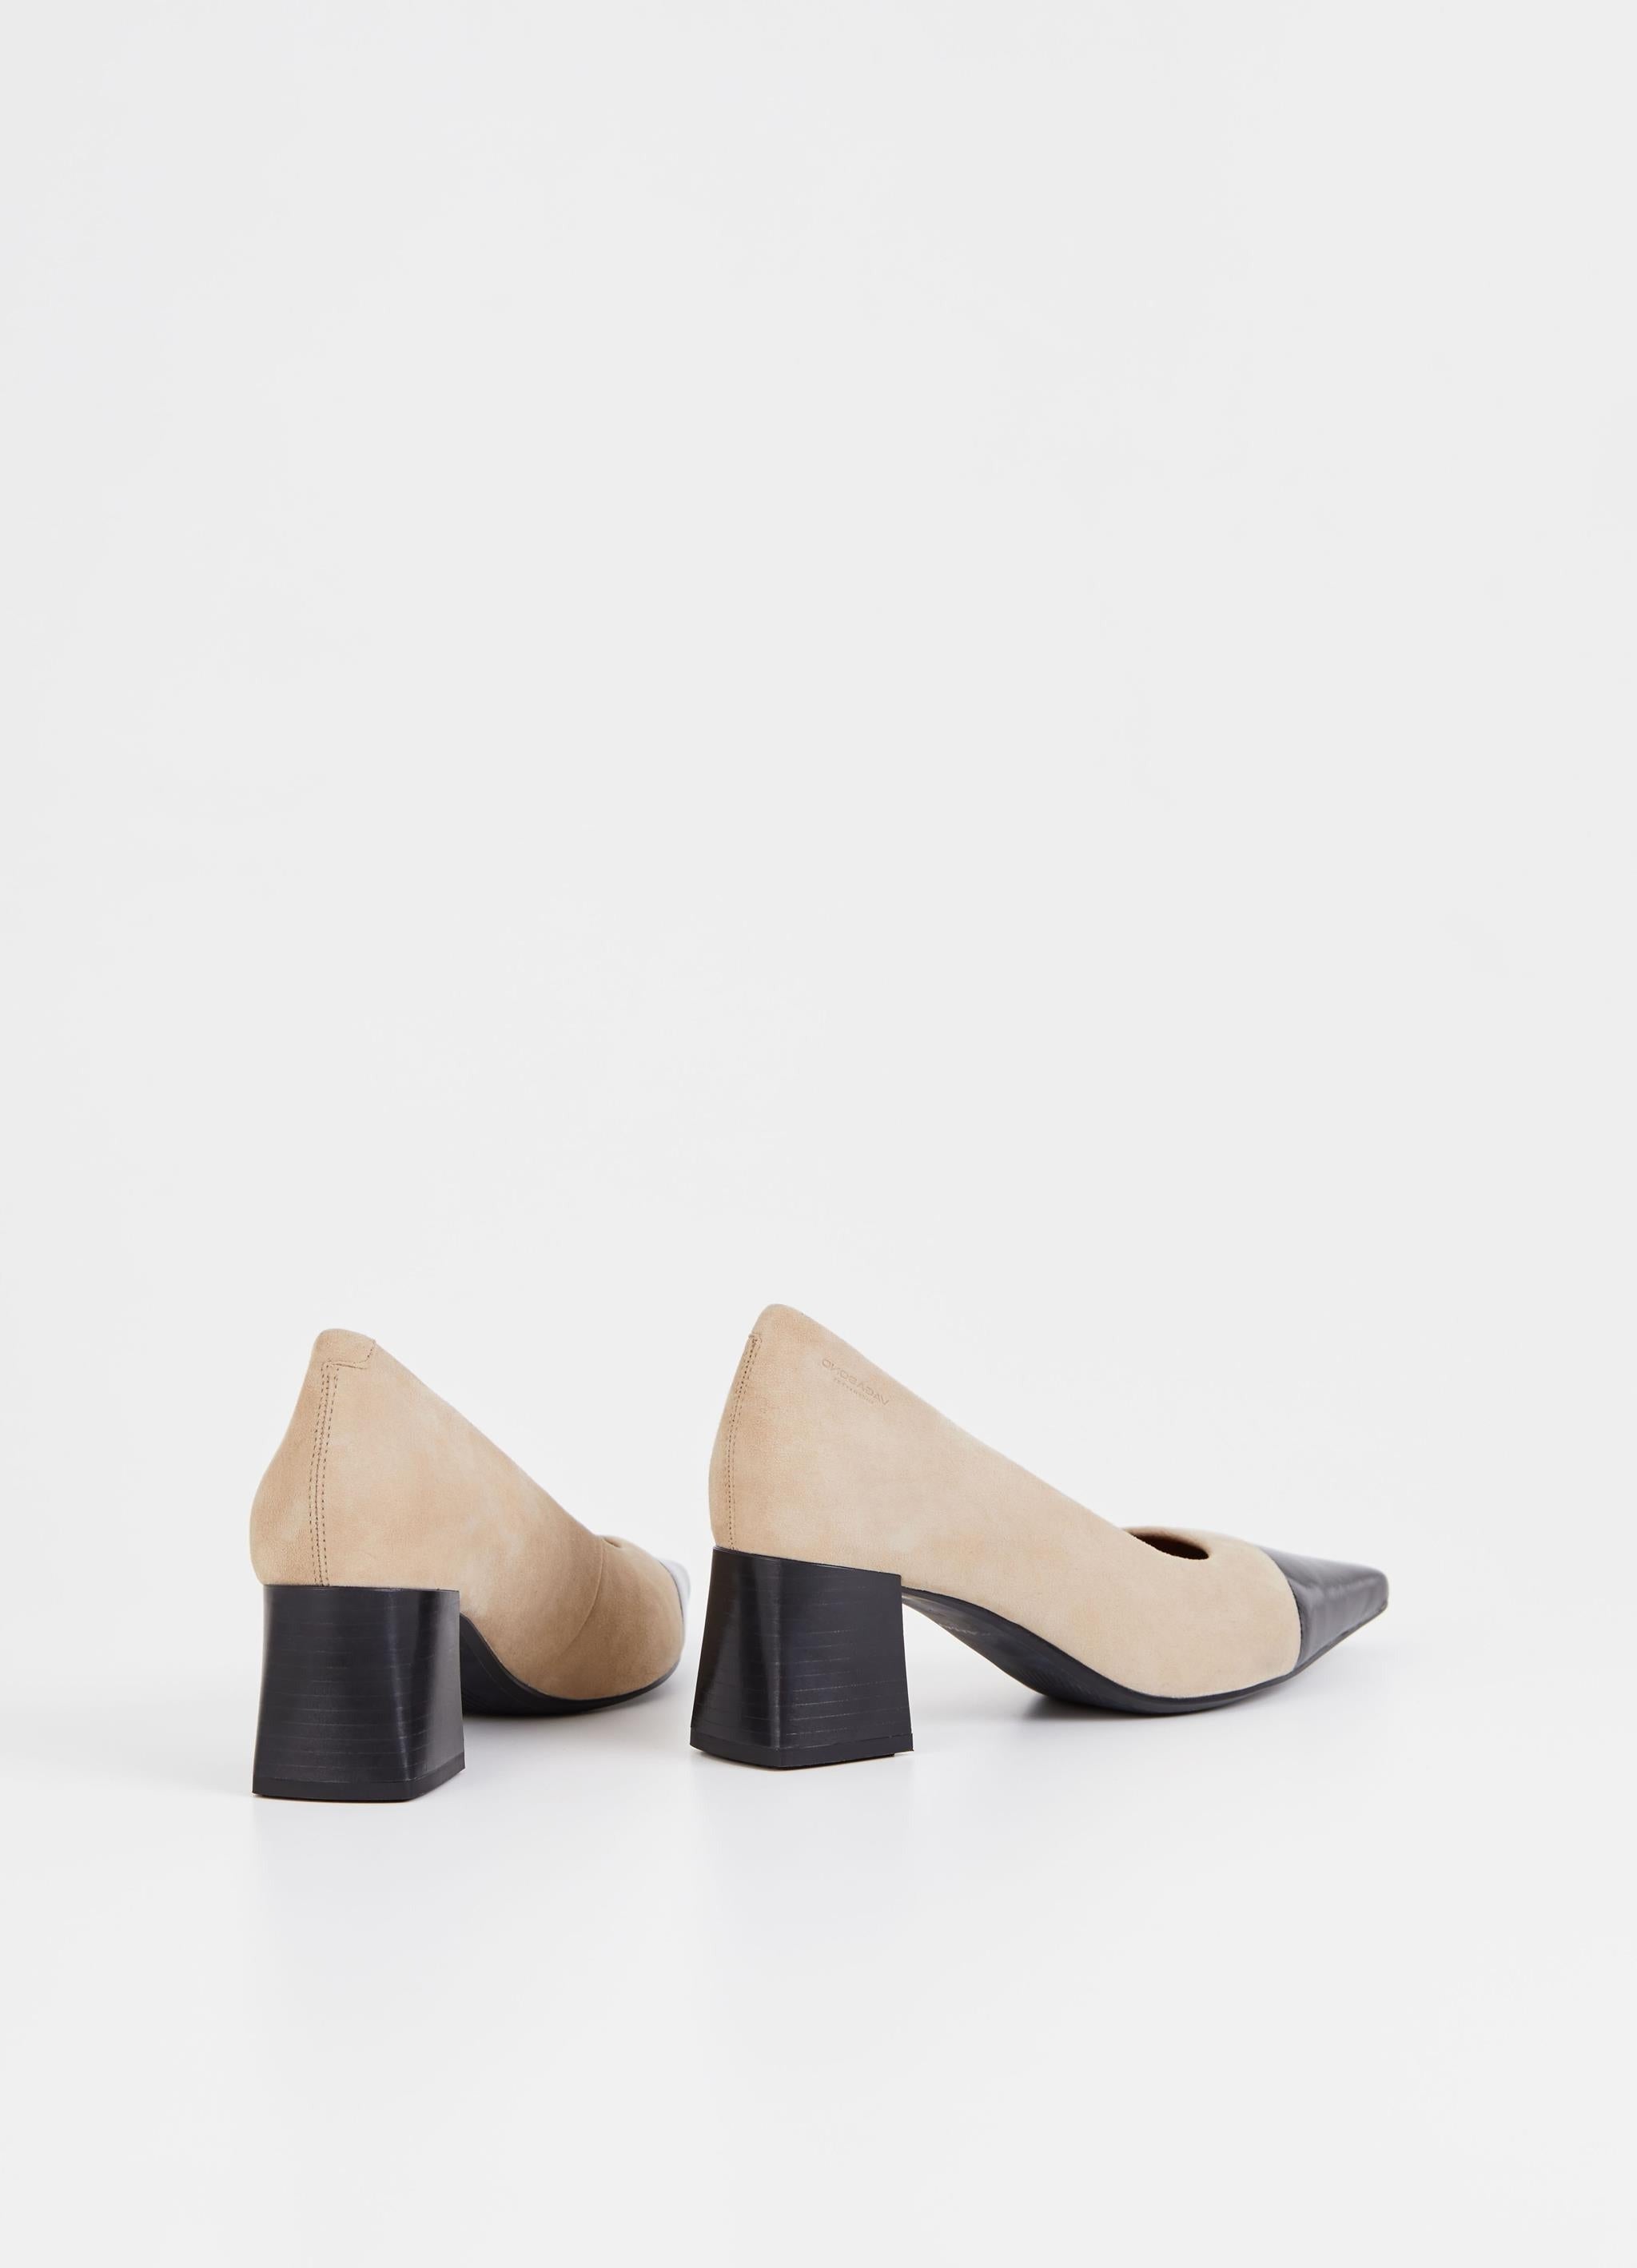 Beige suede pumps with stacked black heel and pointed contrast black patent toe